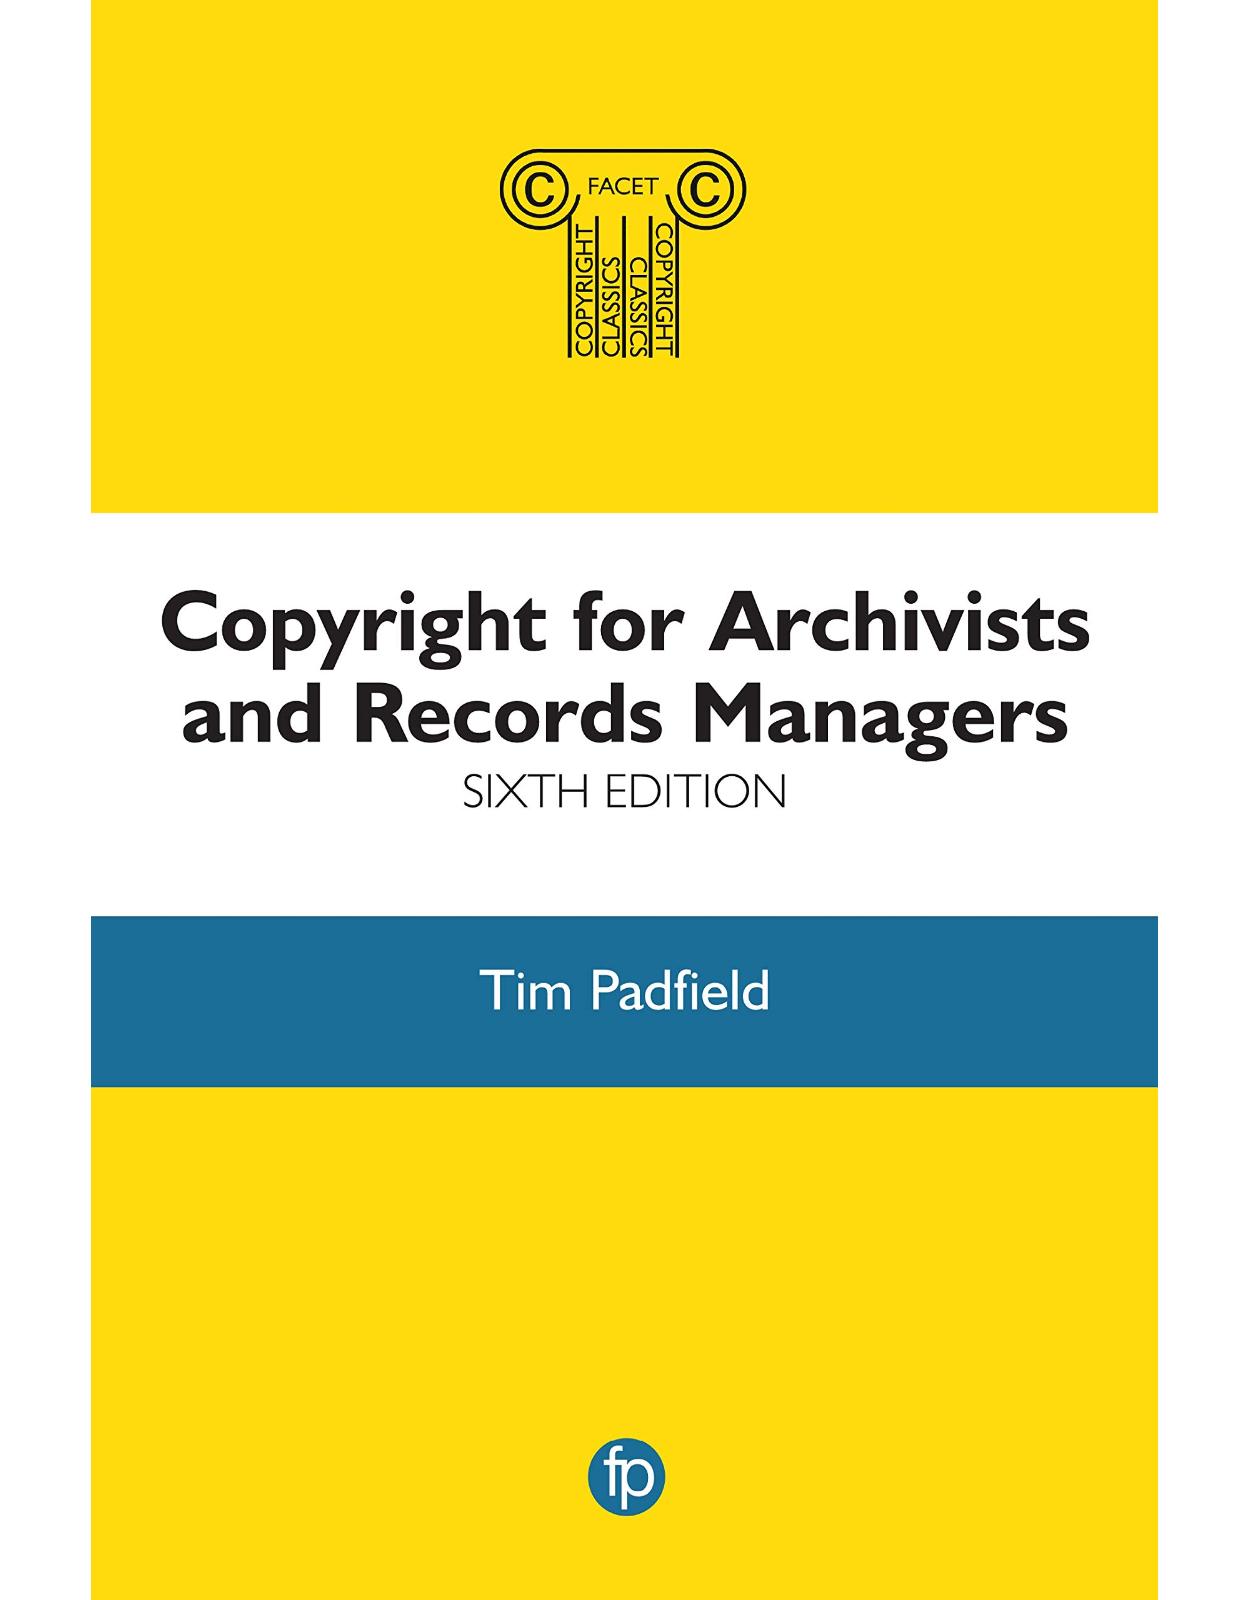 Copyright for Archivists and Records Managers, 6th edition 